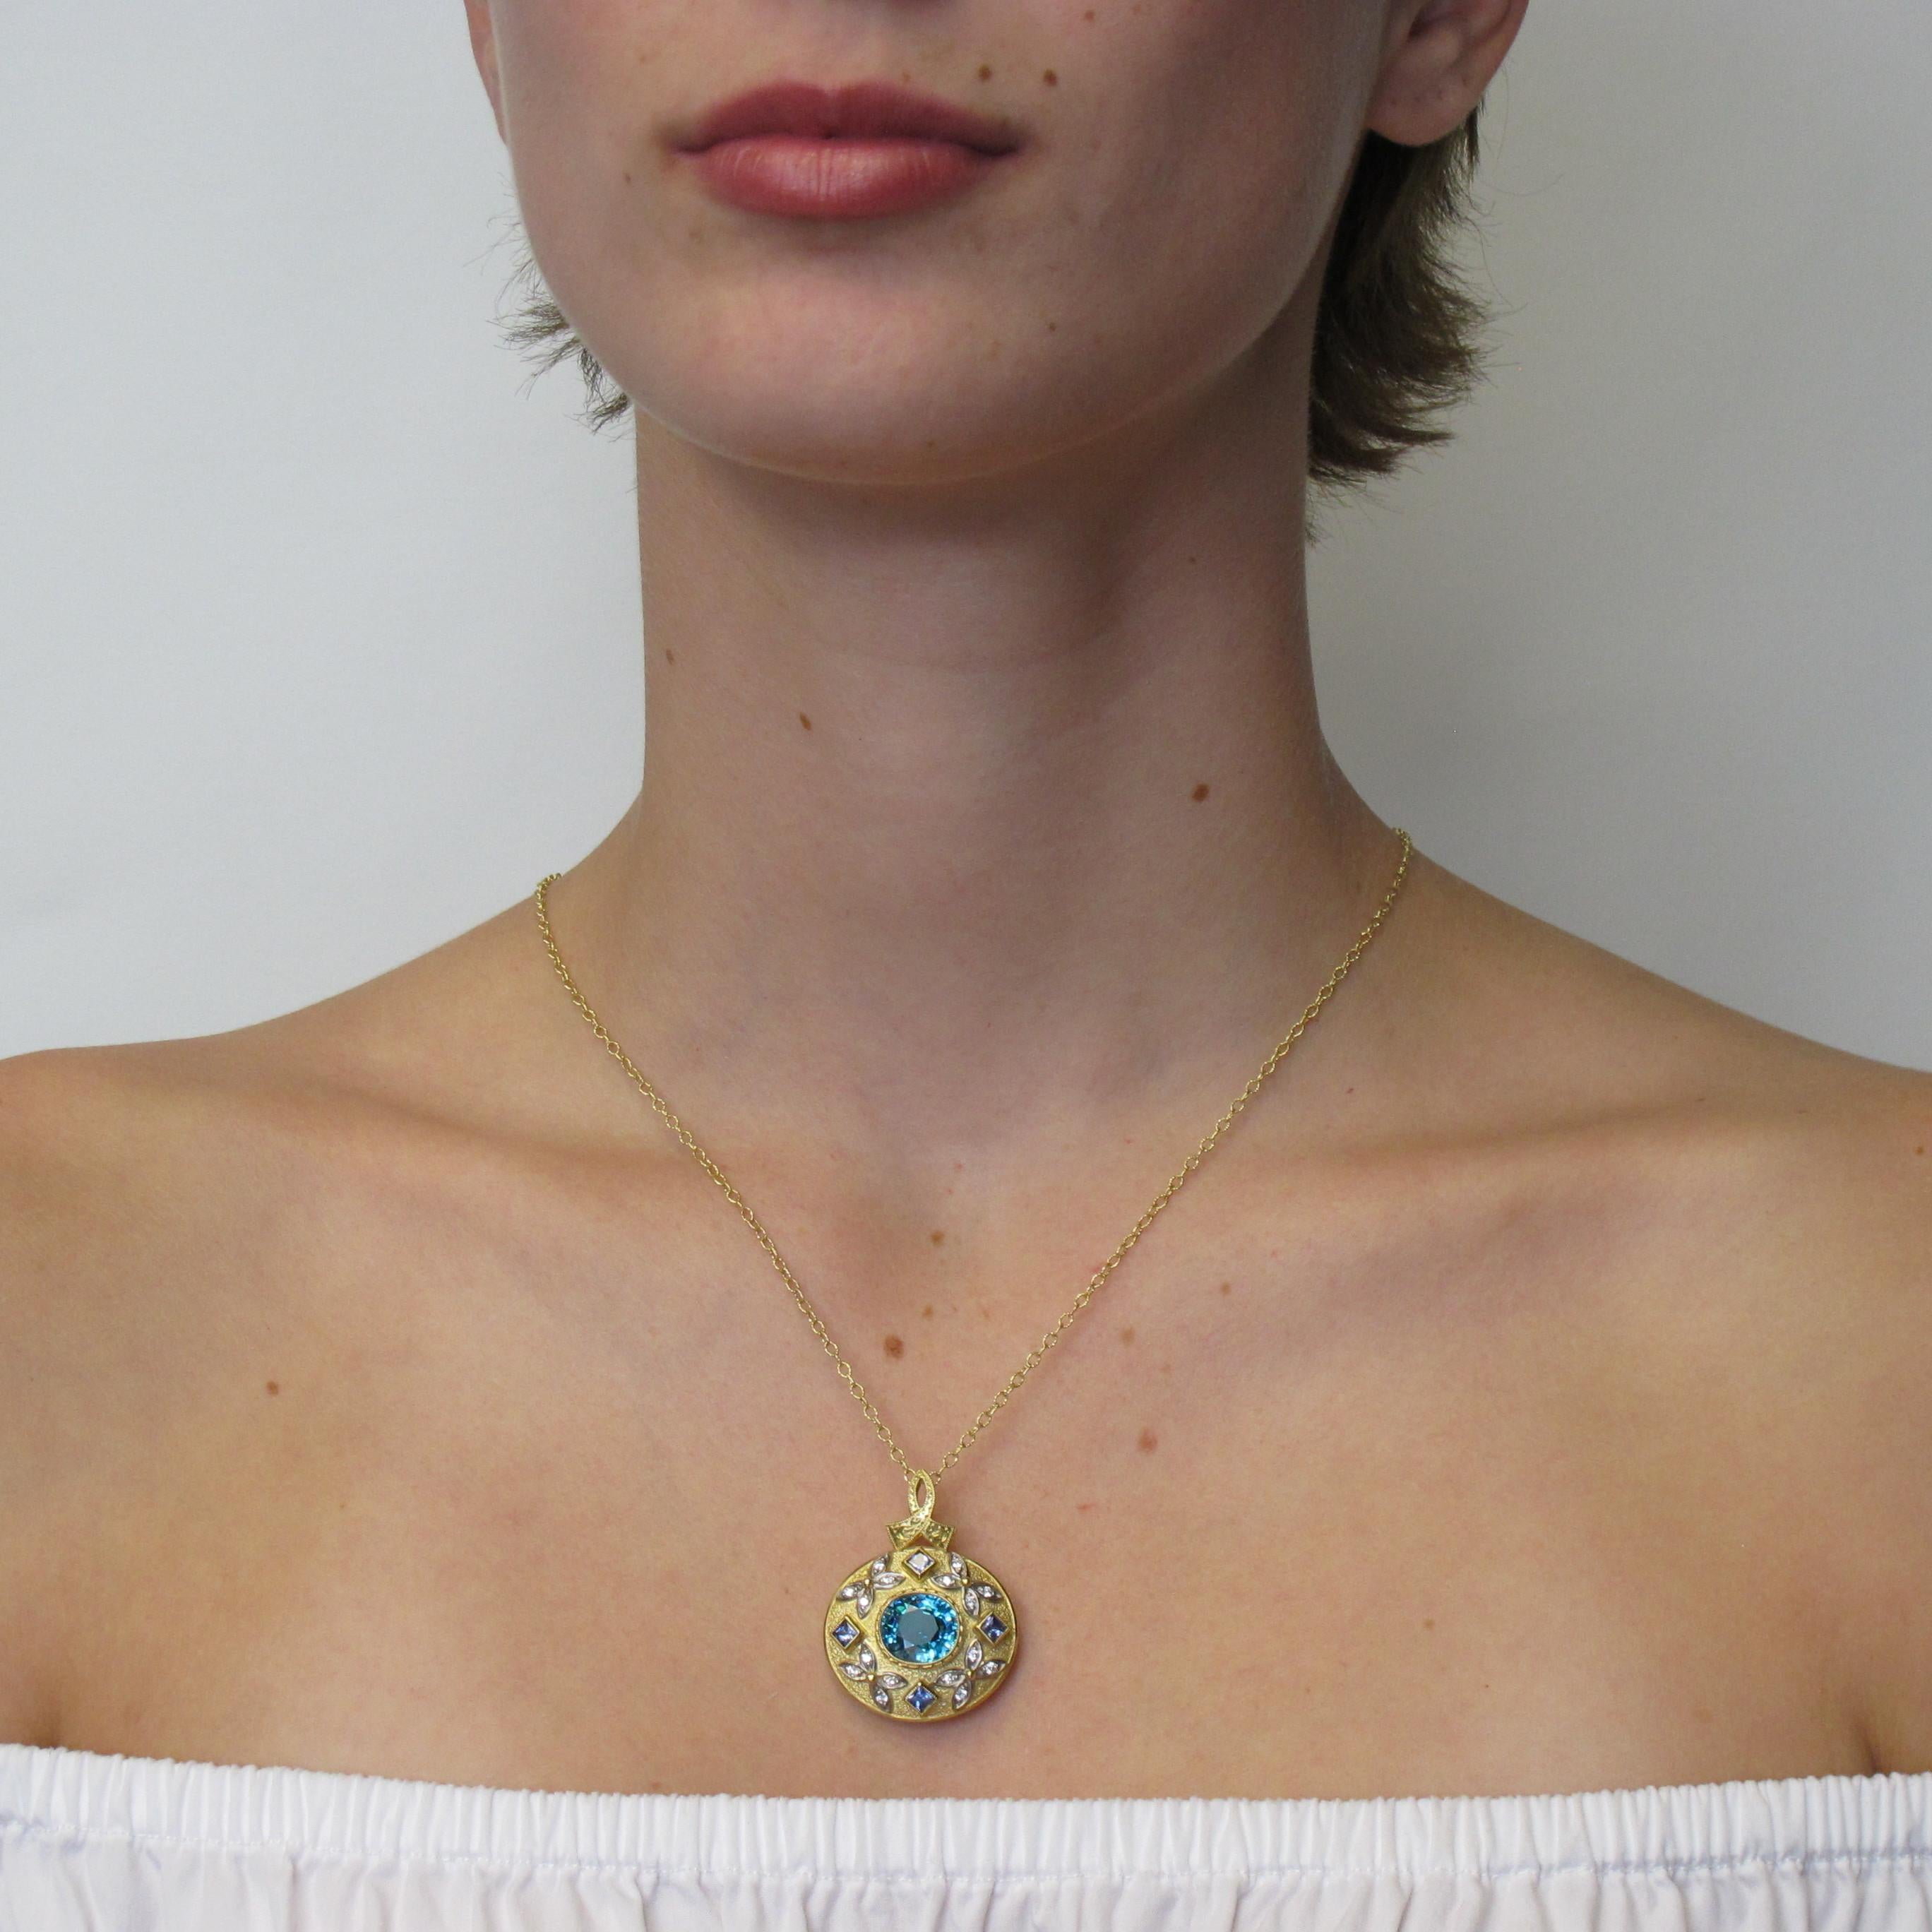 This extraordinary pendant will steal the show! Its detailed design and rich blue zircon gemstone only further highlights the quality craftsmanship we produce here. The cushion cut blue zircon measuring 11x11.5mm (8.09 carats), sixteen round